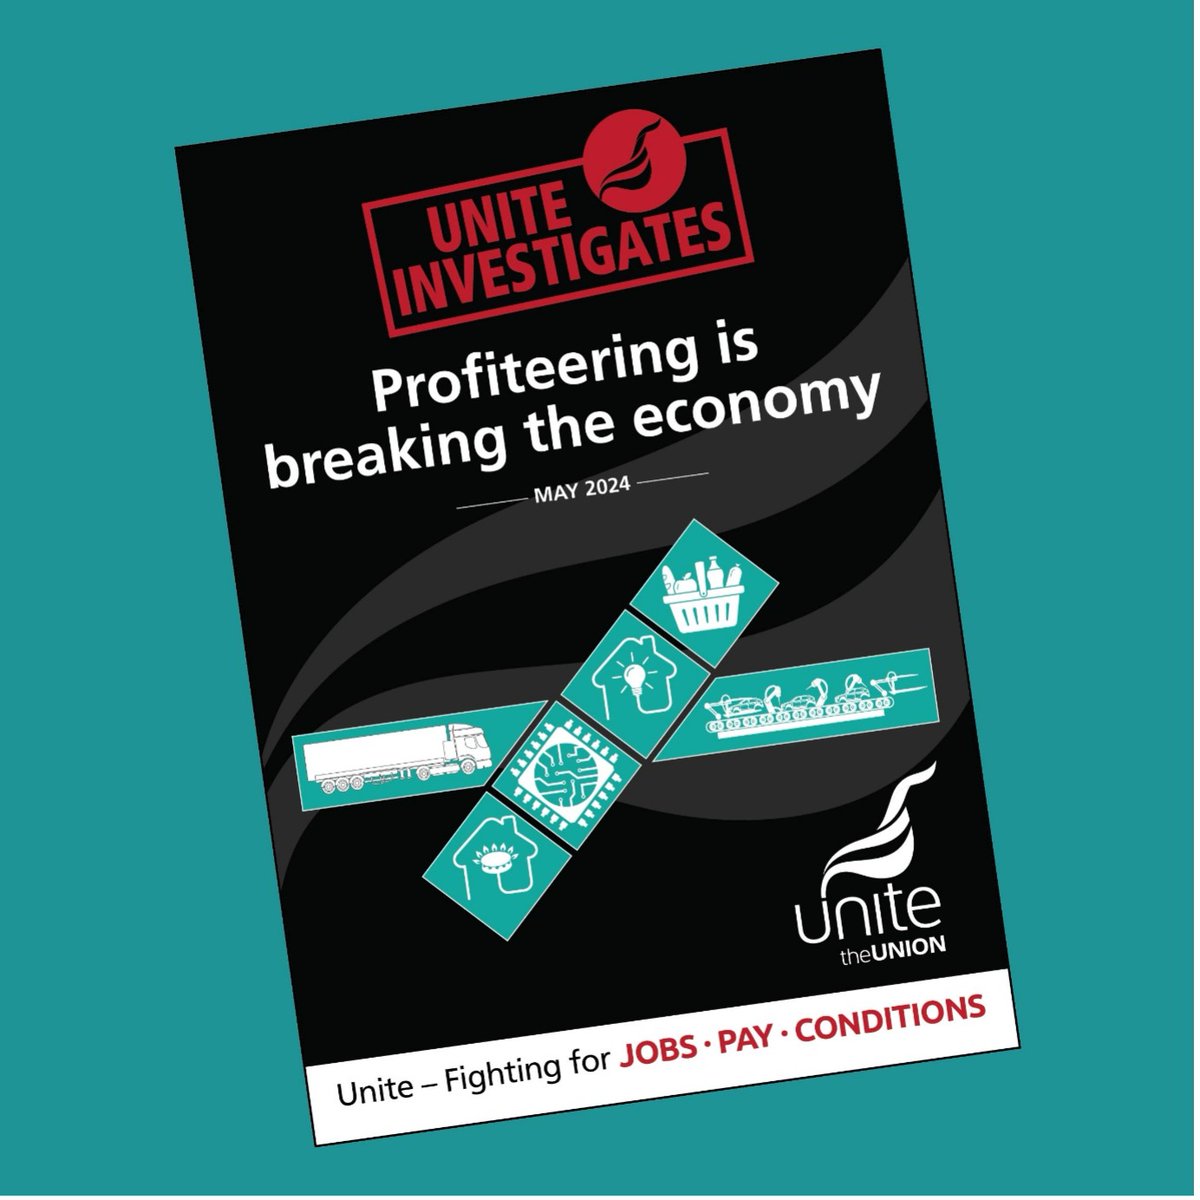 NEW REPORT: Unite has conducted the largest analysis of UK companies’ profits since the pandemic. We’ve uncovered systemic profiteering across the economy. Here is what we found: theguardian.com/business/artic… #profiteering #greedflation